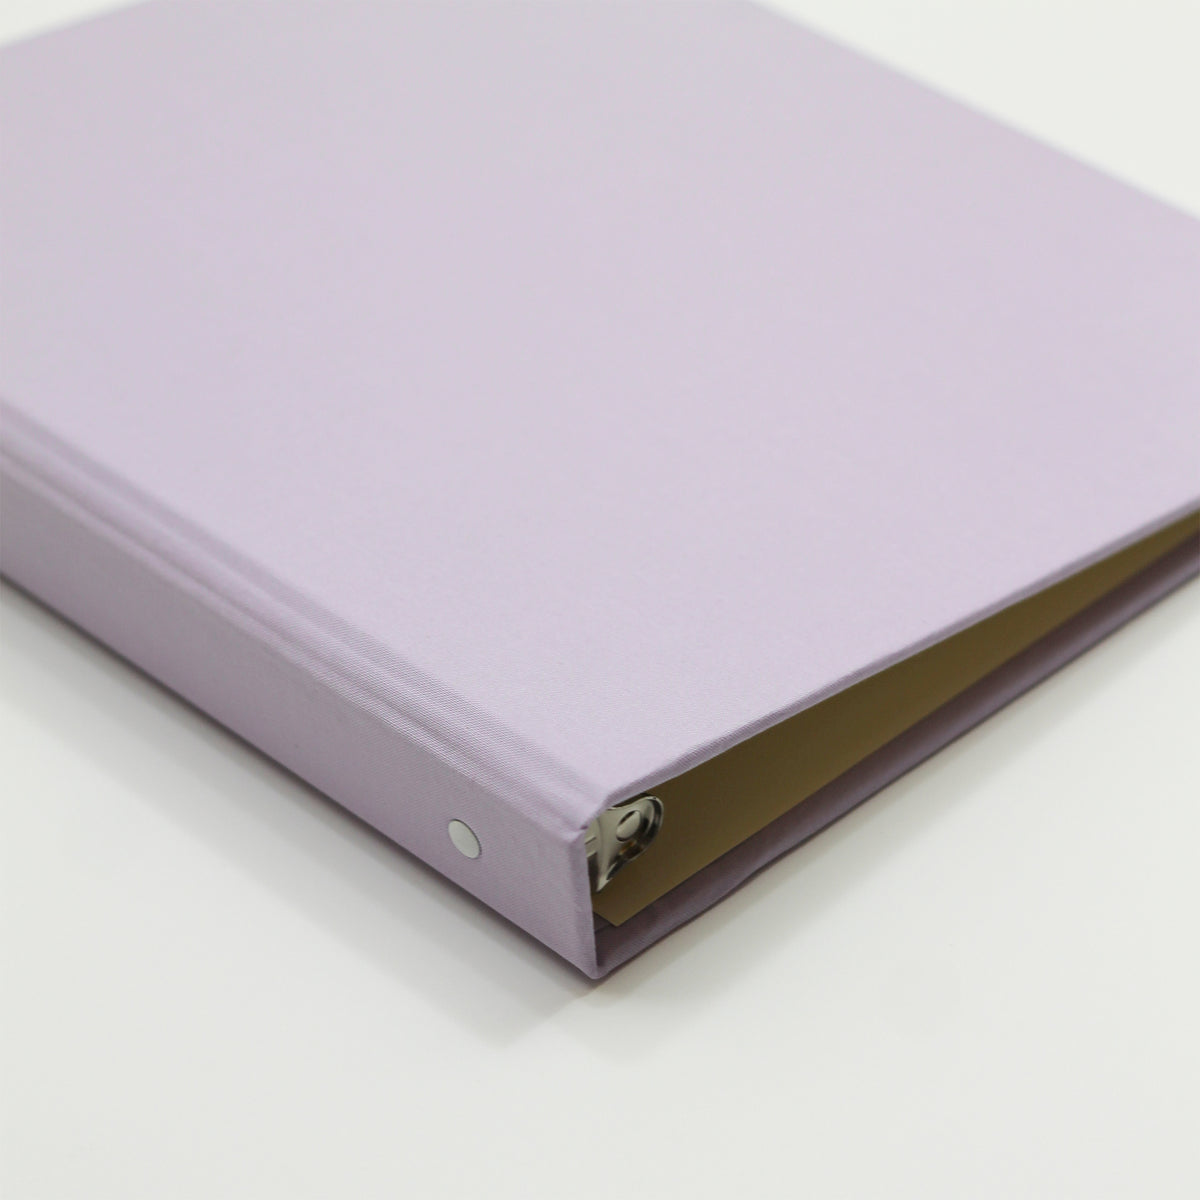 Photo Binder for 5x7 photos | Cover: Lavender Cotton | Available Personalized